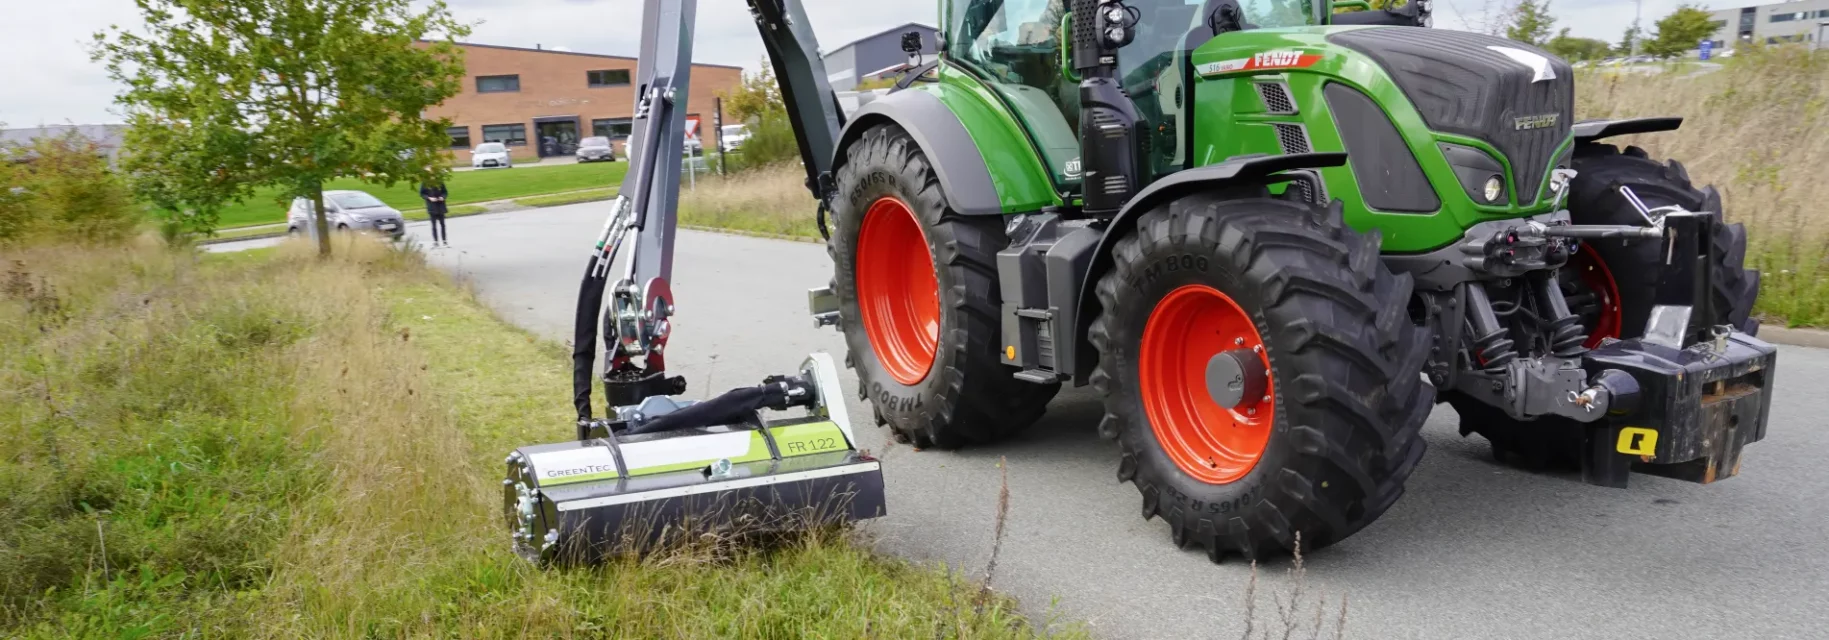 Hydraulic flail mower attachment for tractor